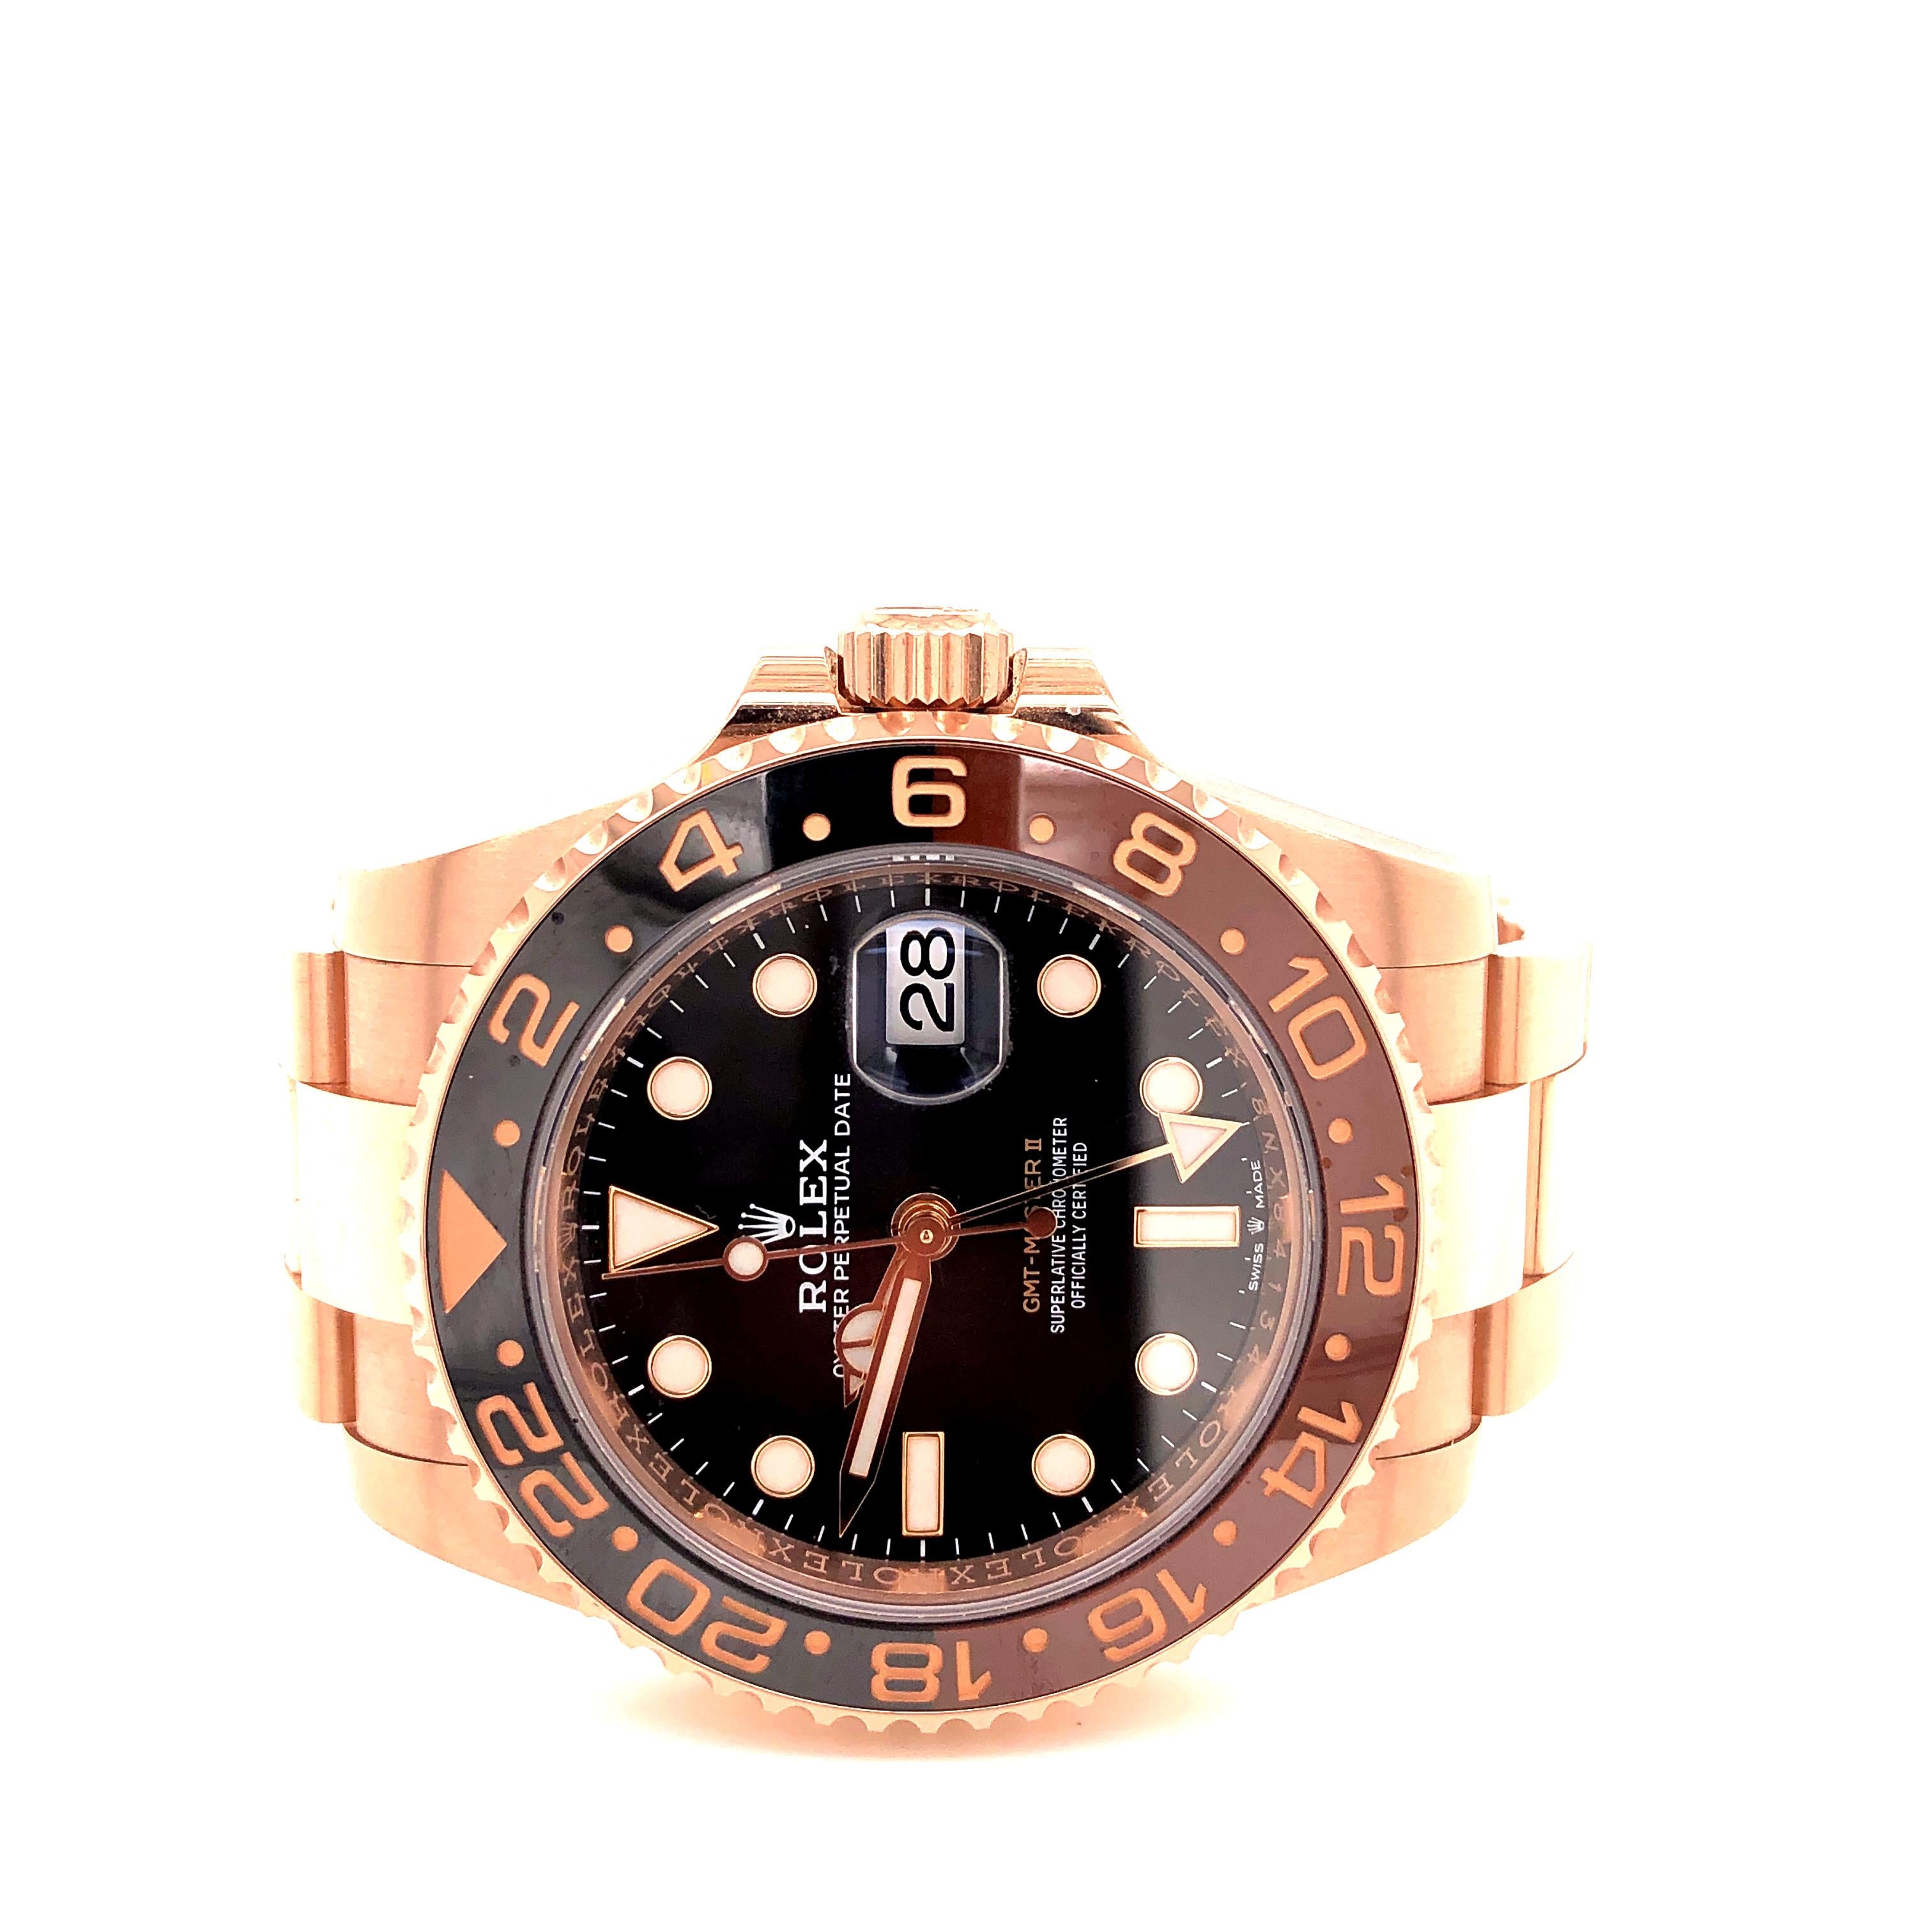 Rolex GMT-Master II (126715CHNR) self-winding automatic watch, features a 40mm Everose gold case with a black and brown 